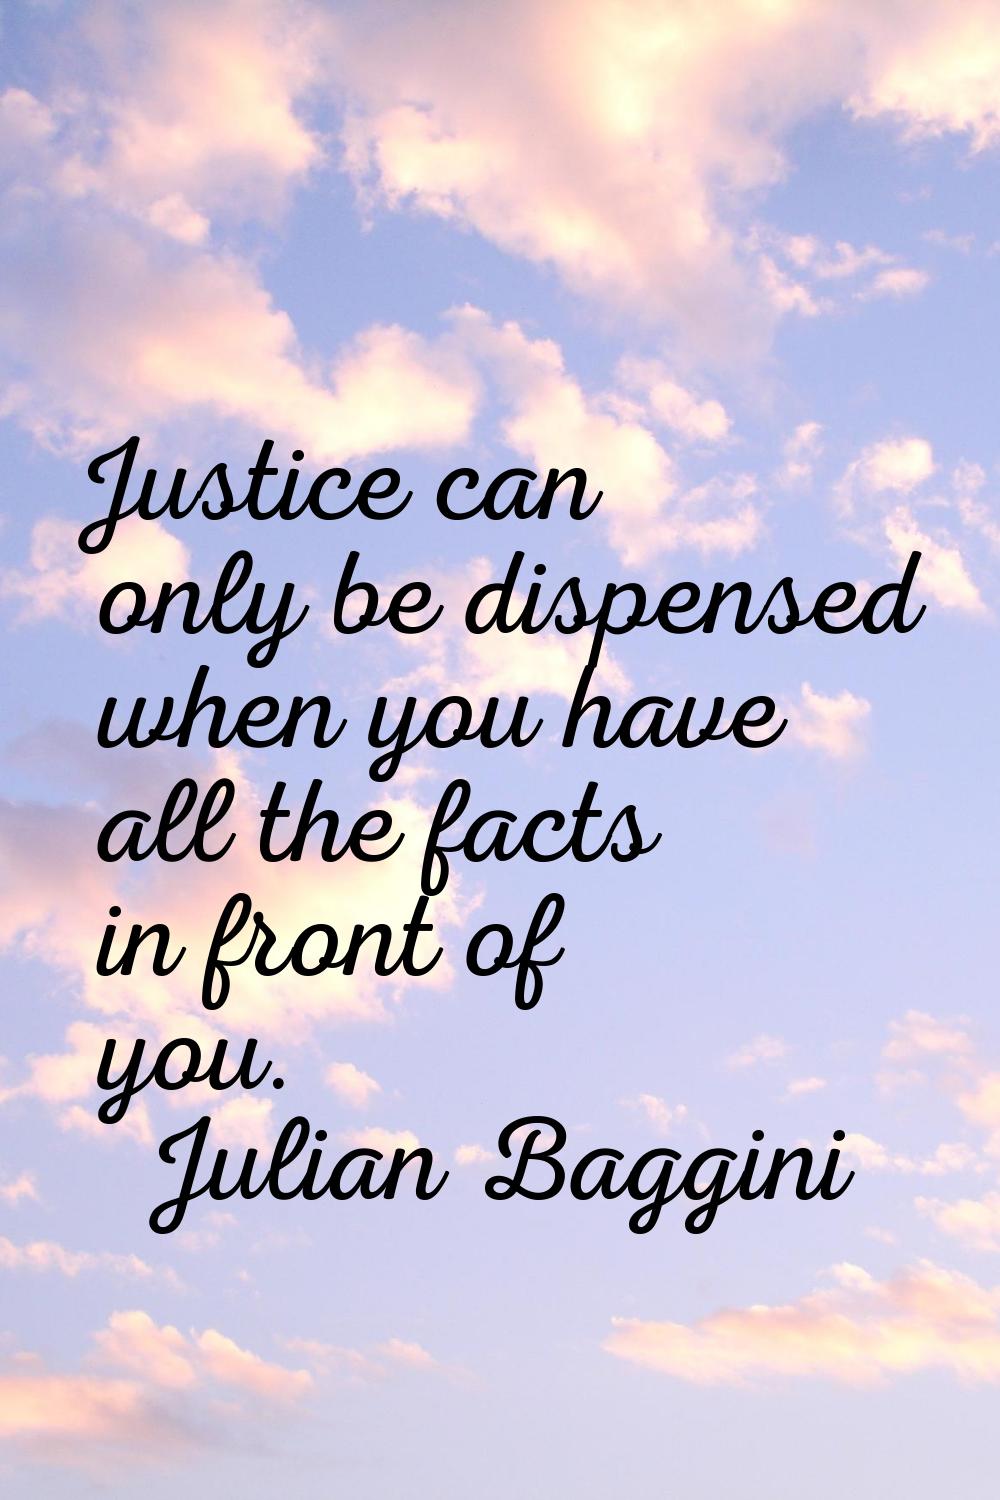 Justice can only be dispensed when you have all the facts in front of you.